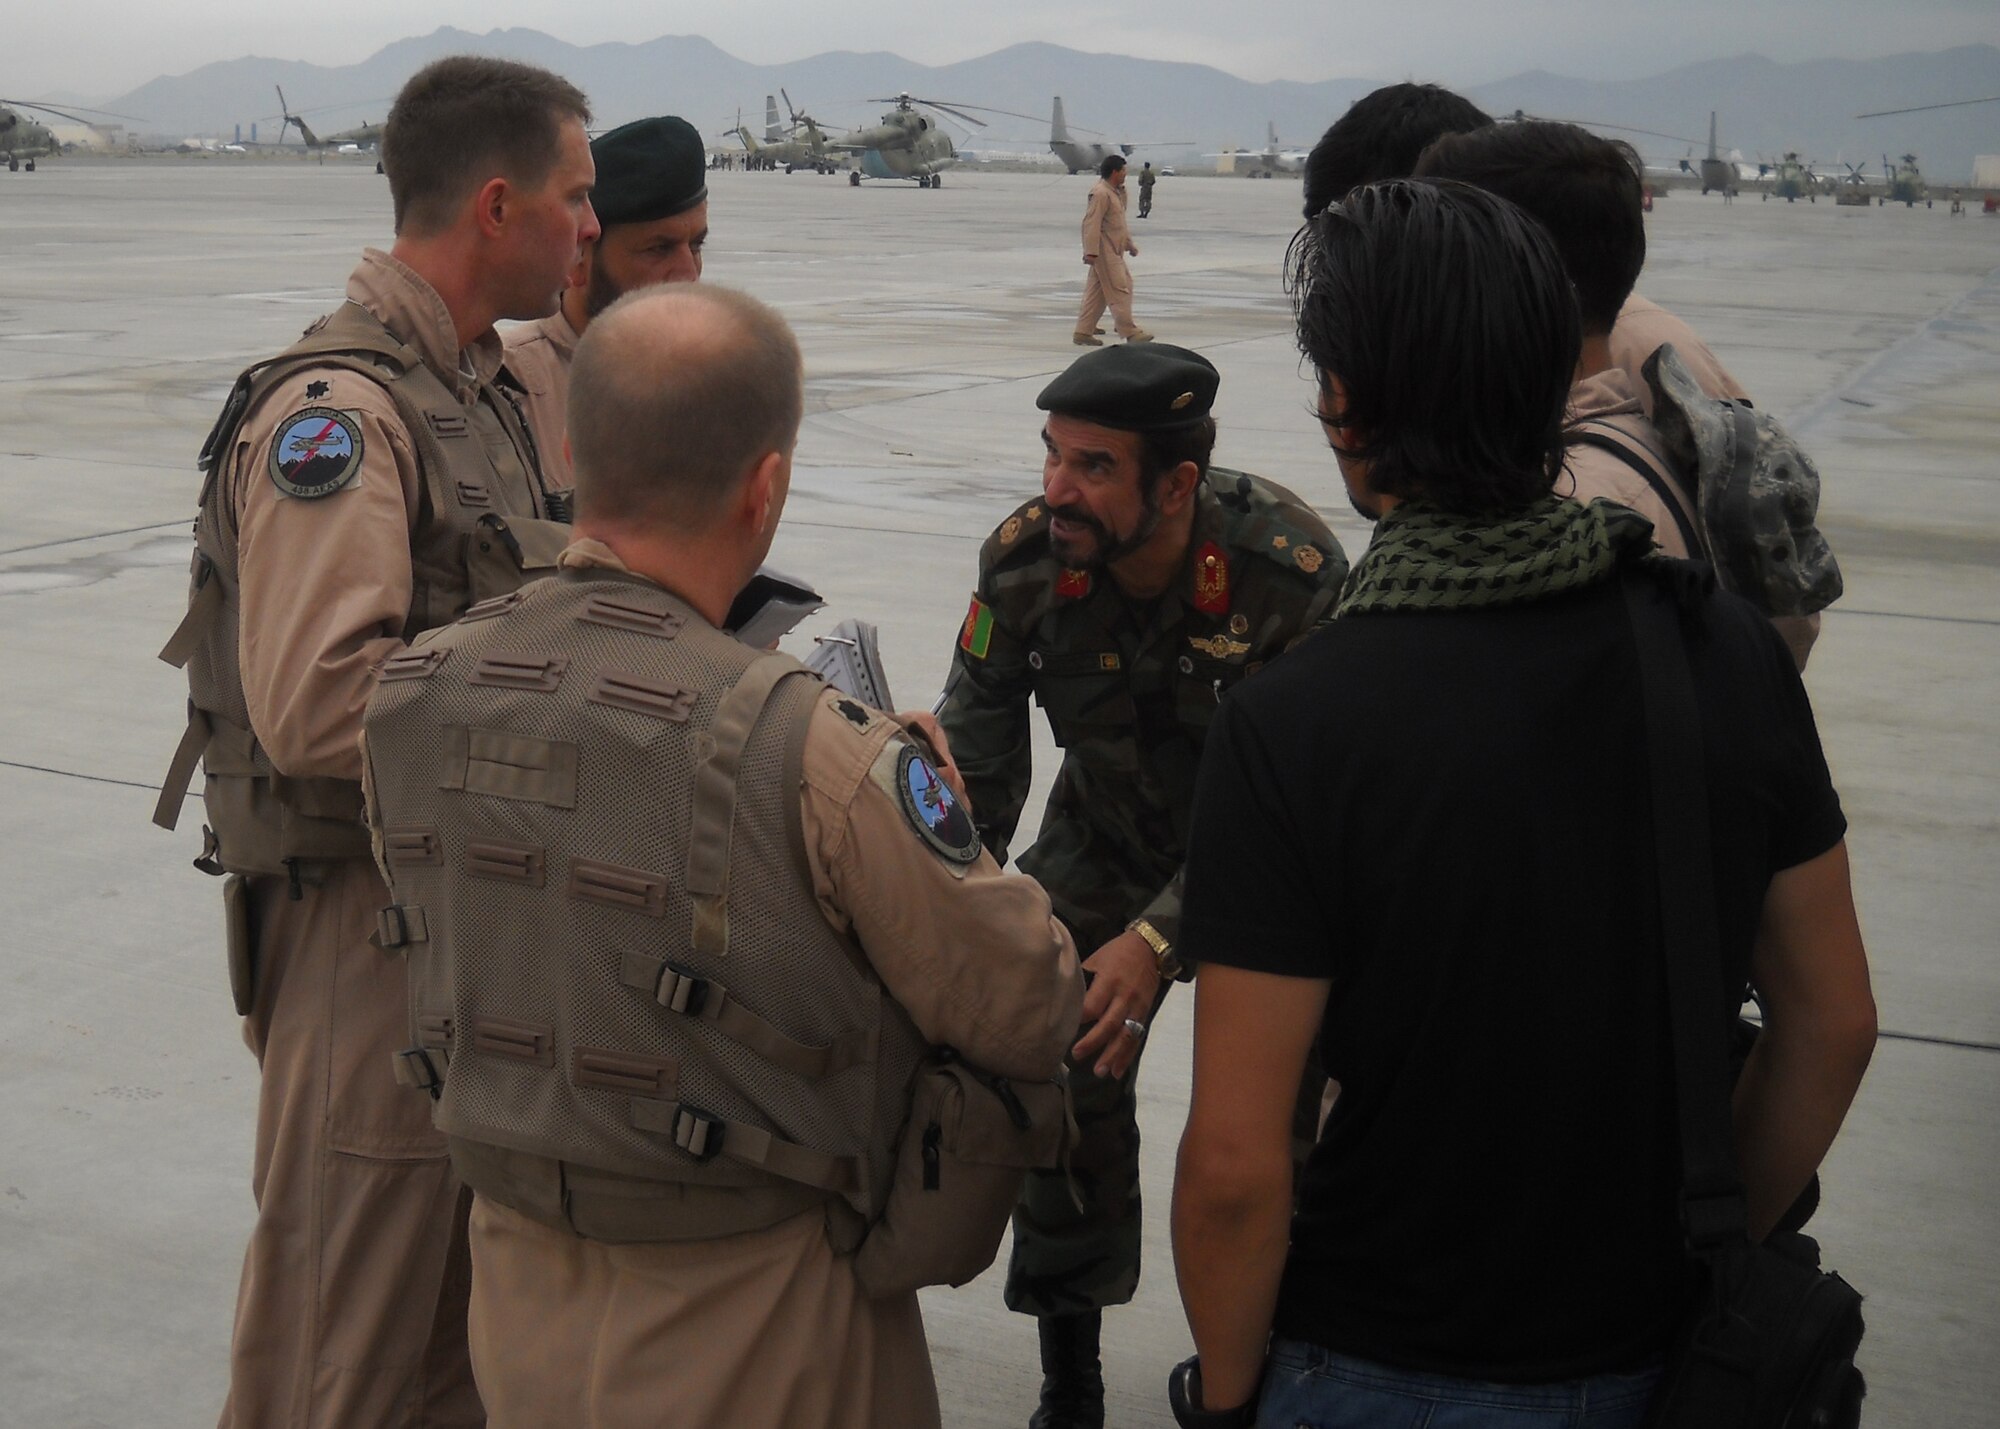 Lt. Col. Greg Roberts, 19th Air Force, briefs an Afghan Air Force crew before departing on a rescue mission which leads to the saving of more than 2,000 people over two days. Roberts received the Distinguished Flying Cross with valor for his actions during the rescue in Afghanistan July 28-29, 2010. (Courtesy photo)